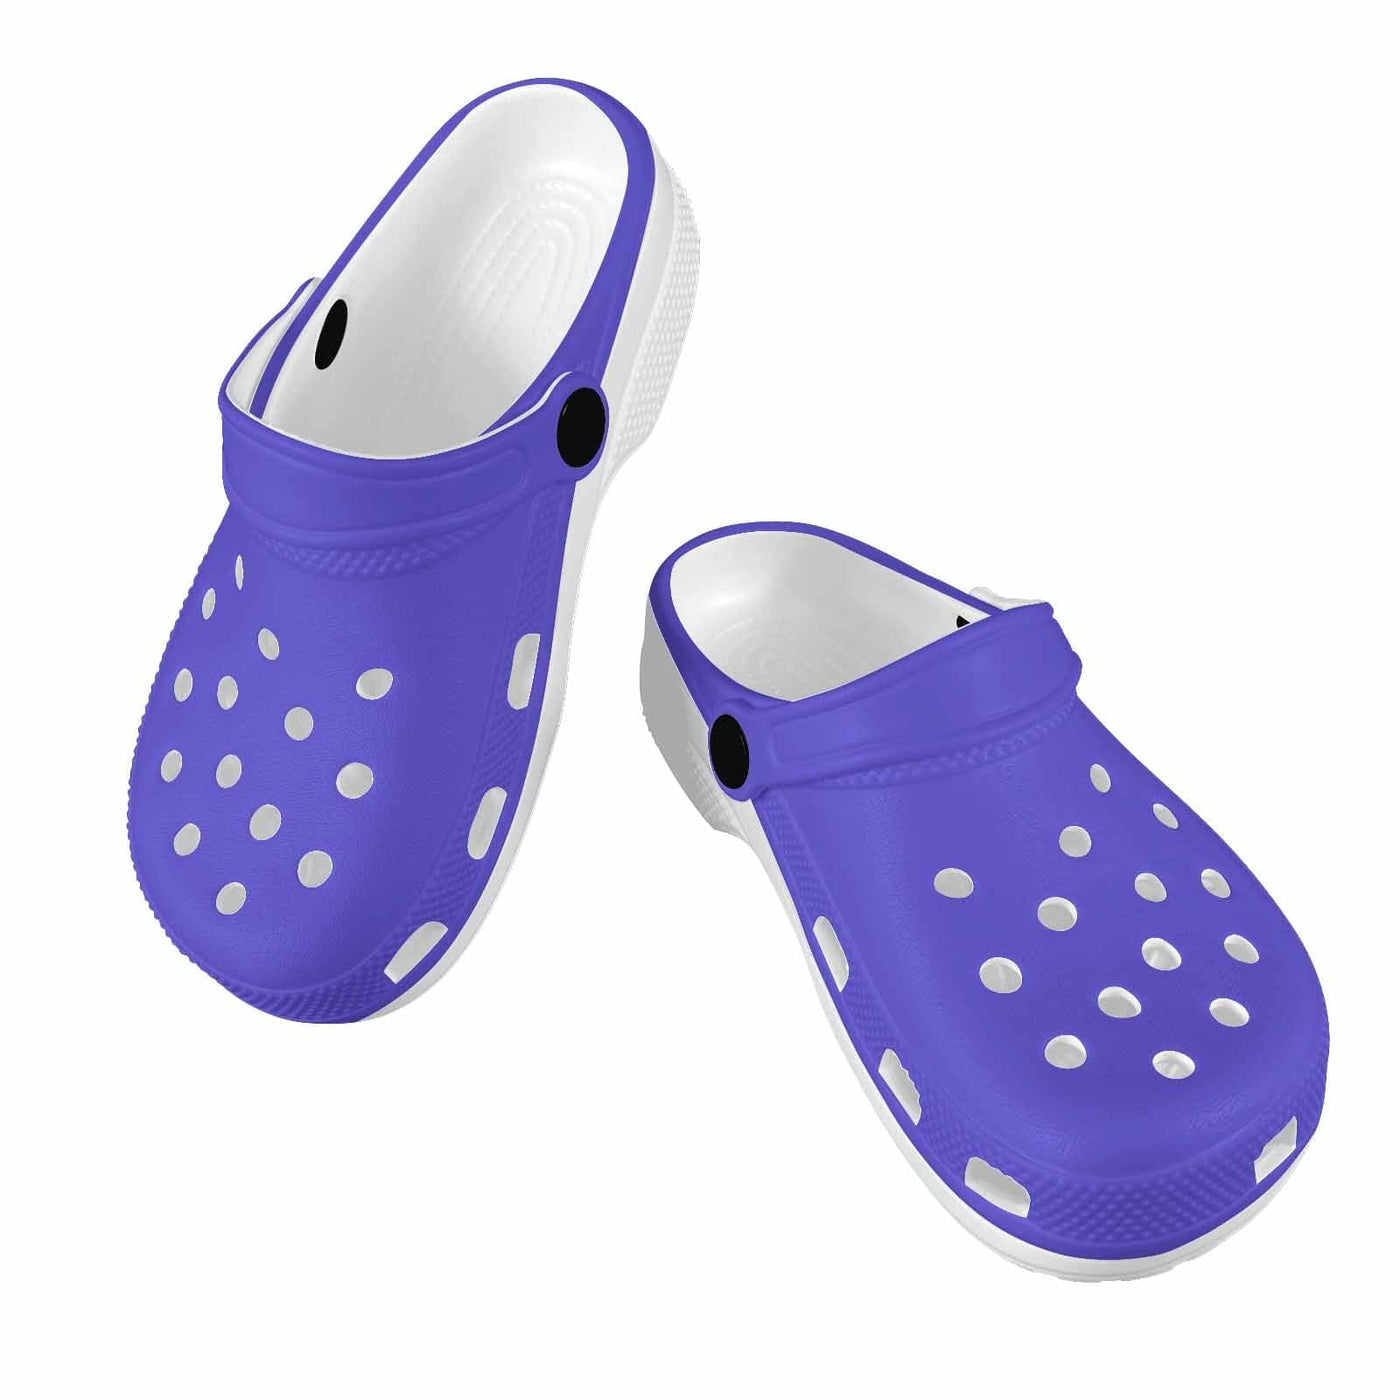 Blue Iris Clogs For Youth - Unisex | Clogs | Youth